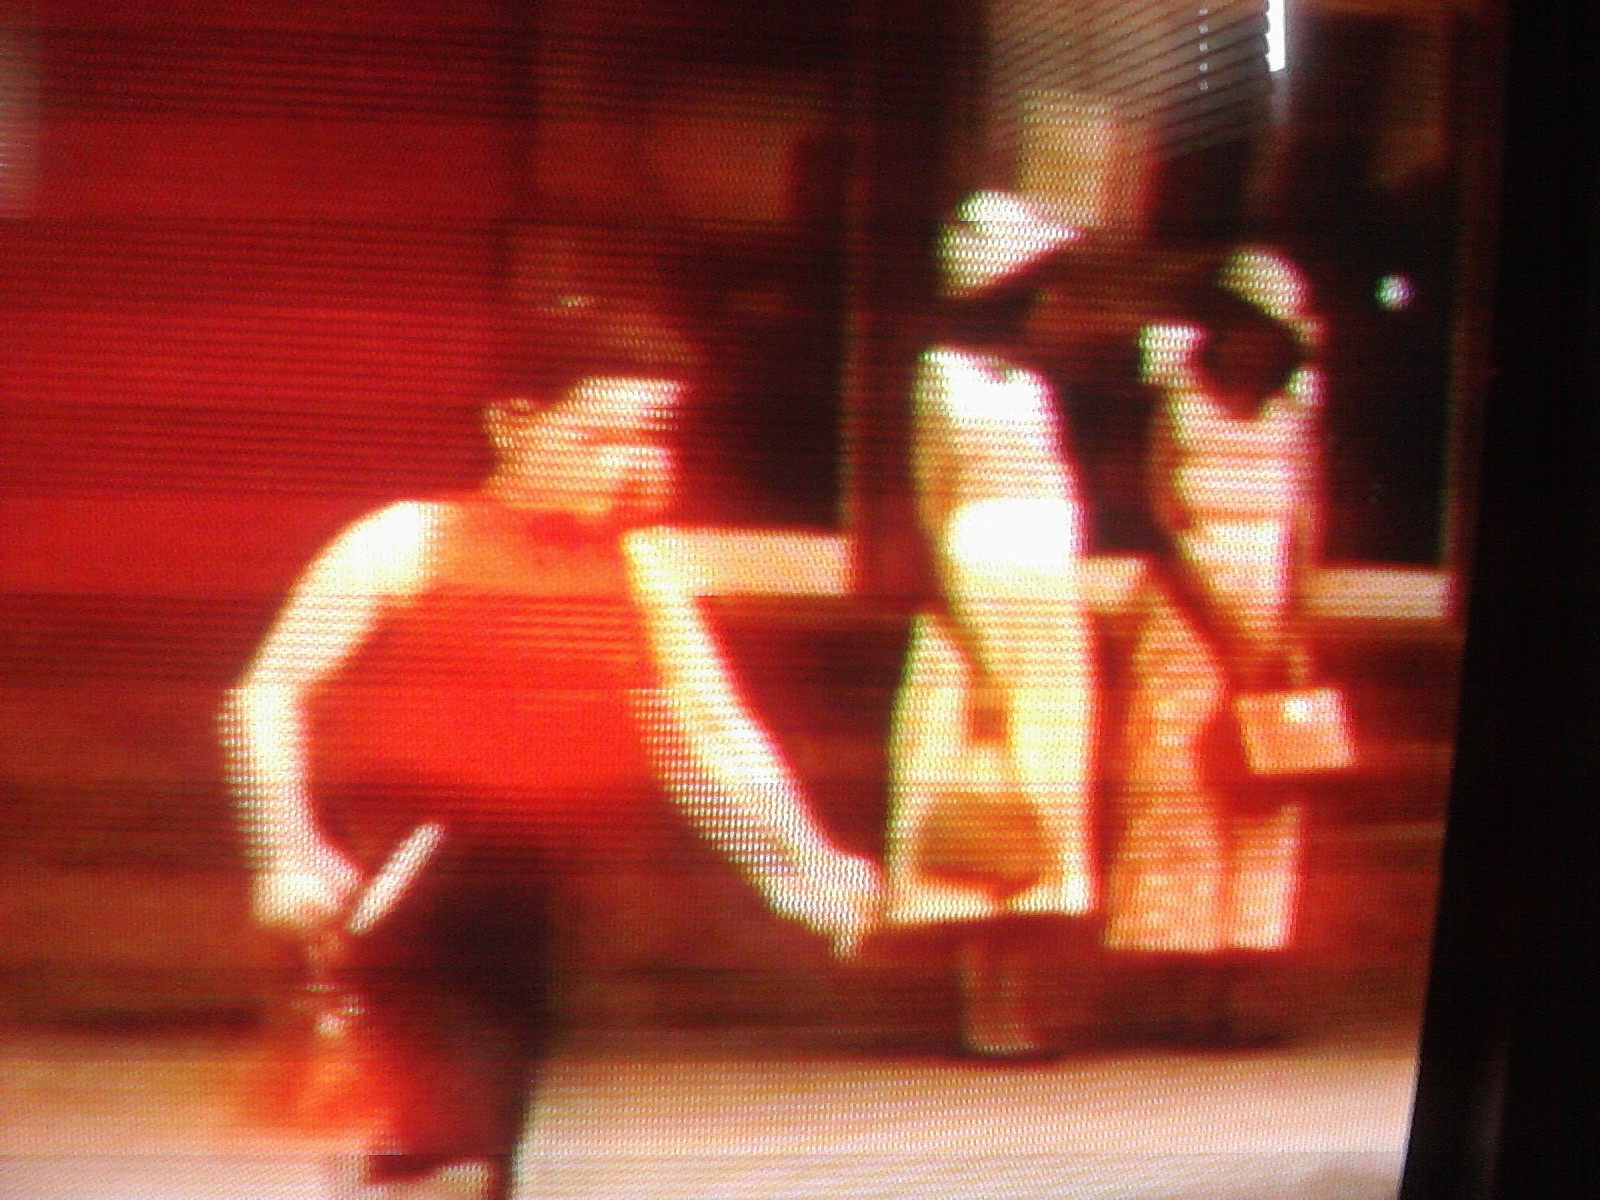 Maria Frisby in the movie Sincerely Yours. Maria Frisby is wearing the white dress and white hat.